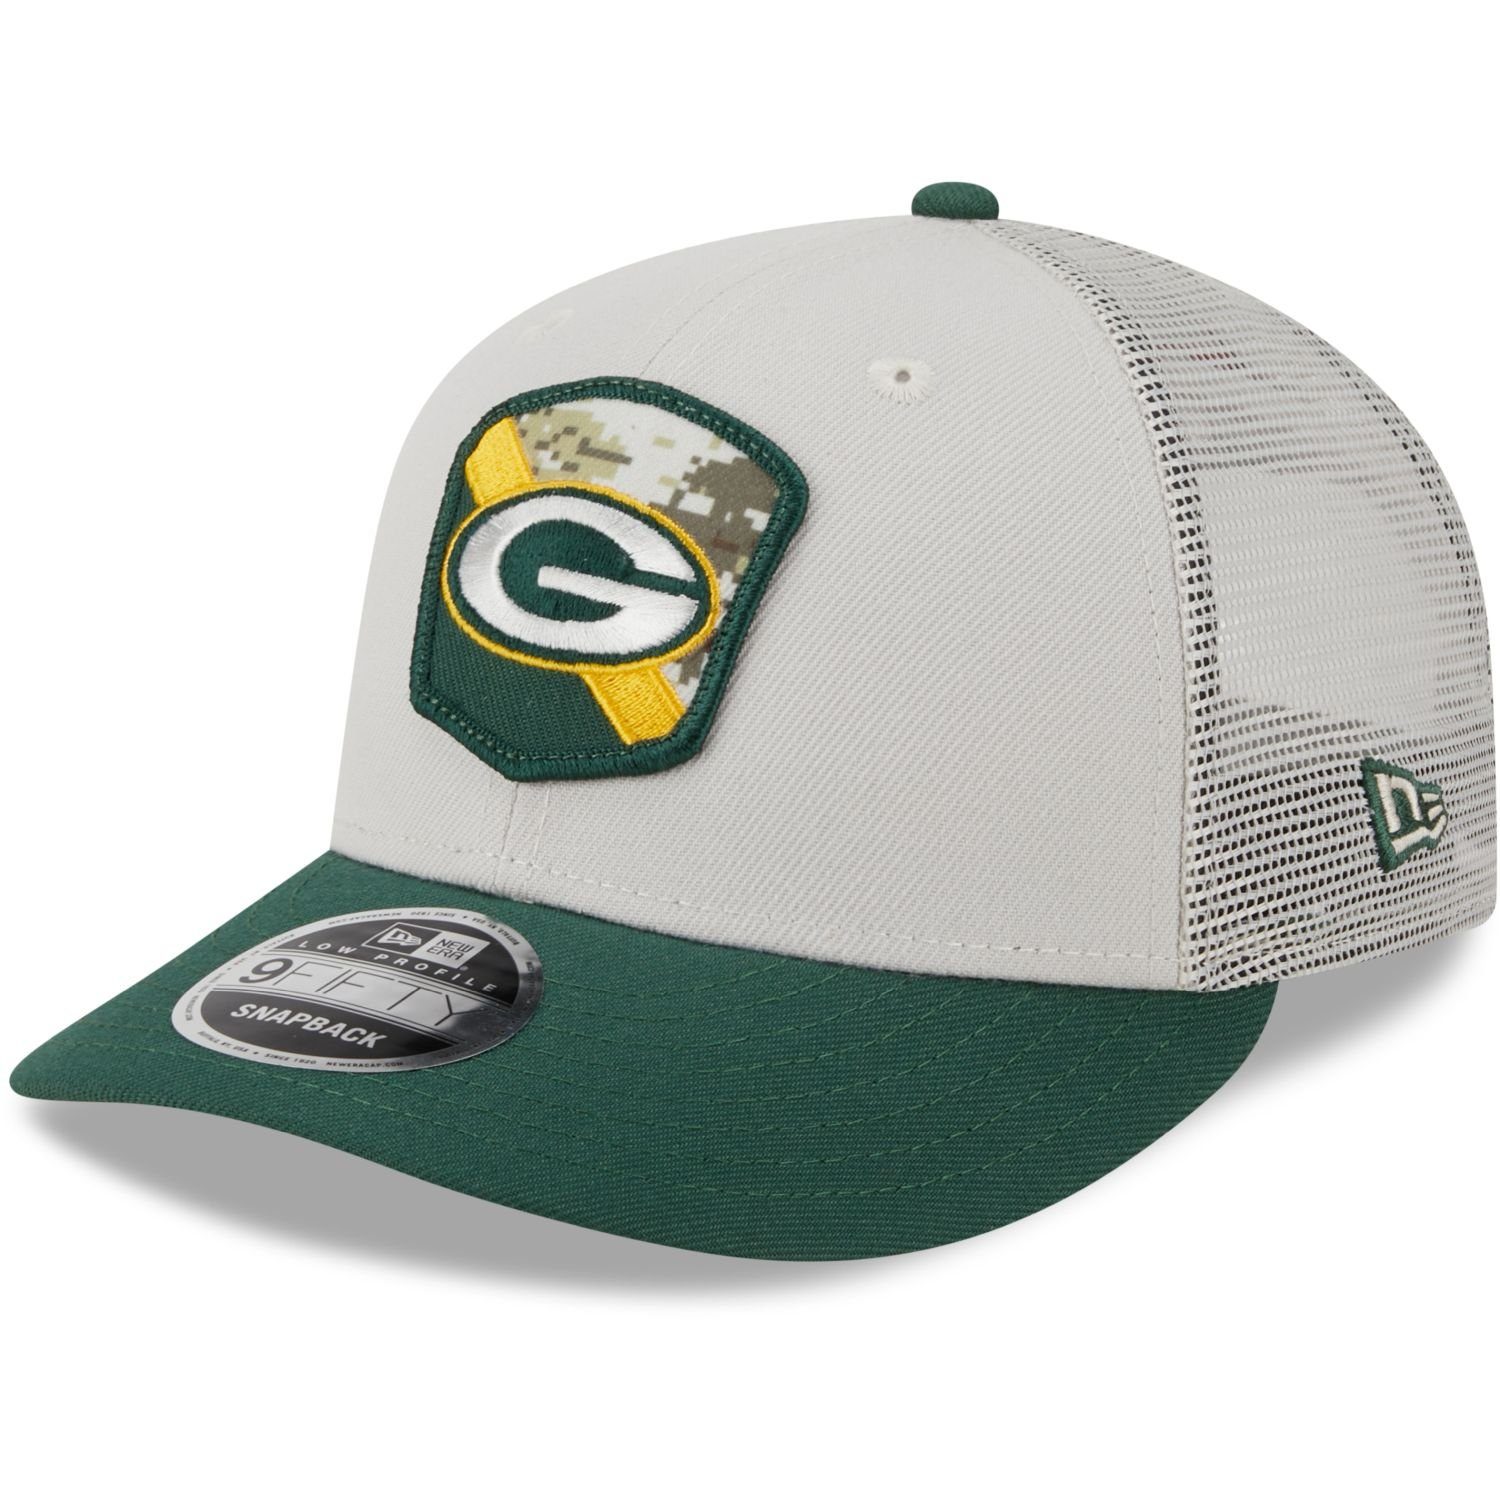 NFL Bay Snap Service Green Low 9Fifty Packers Cap New to Snapback Profile Era Salute